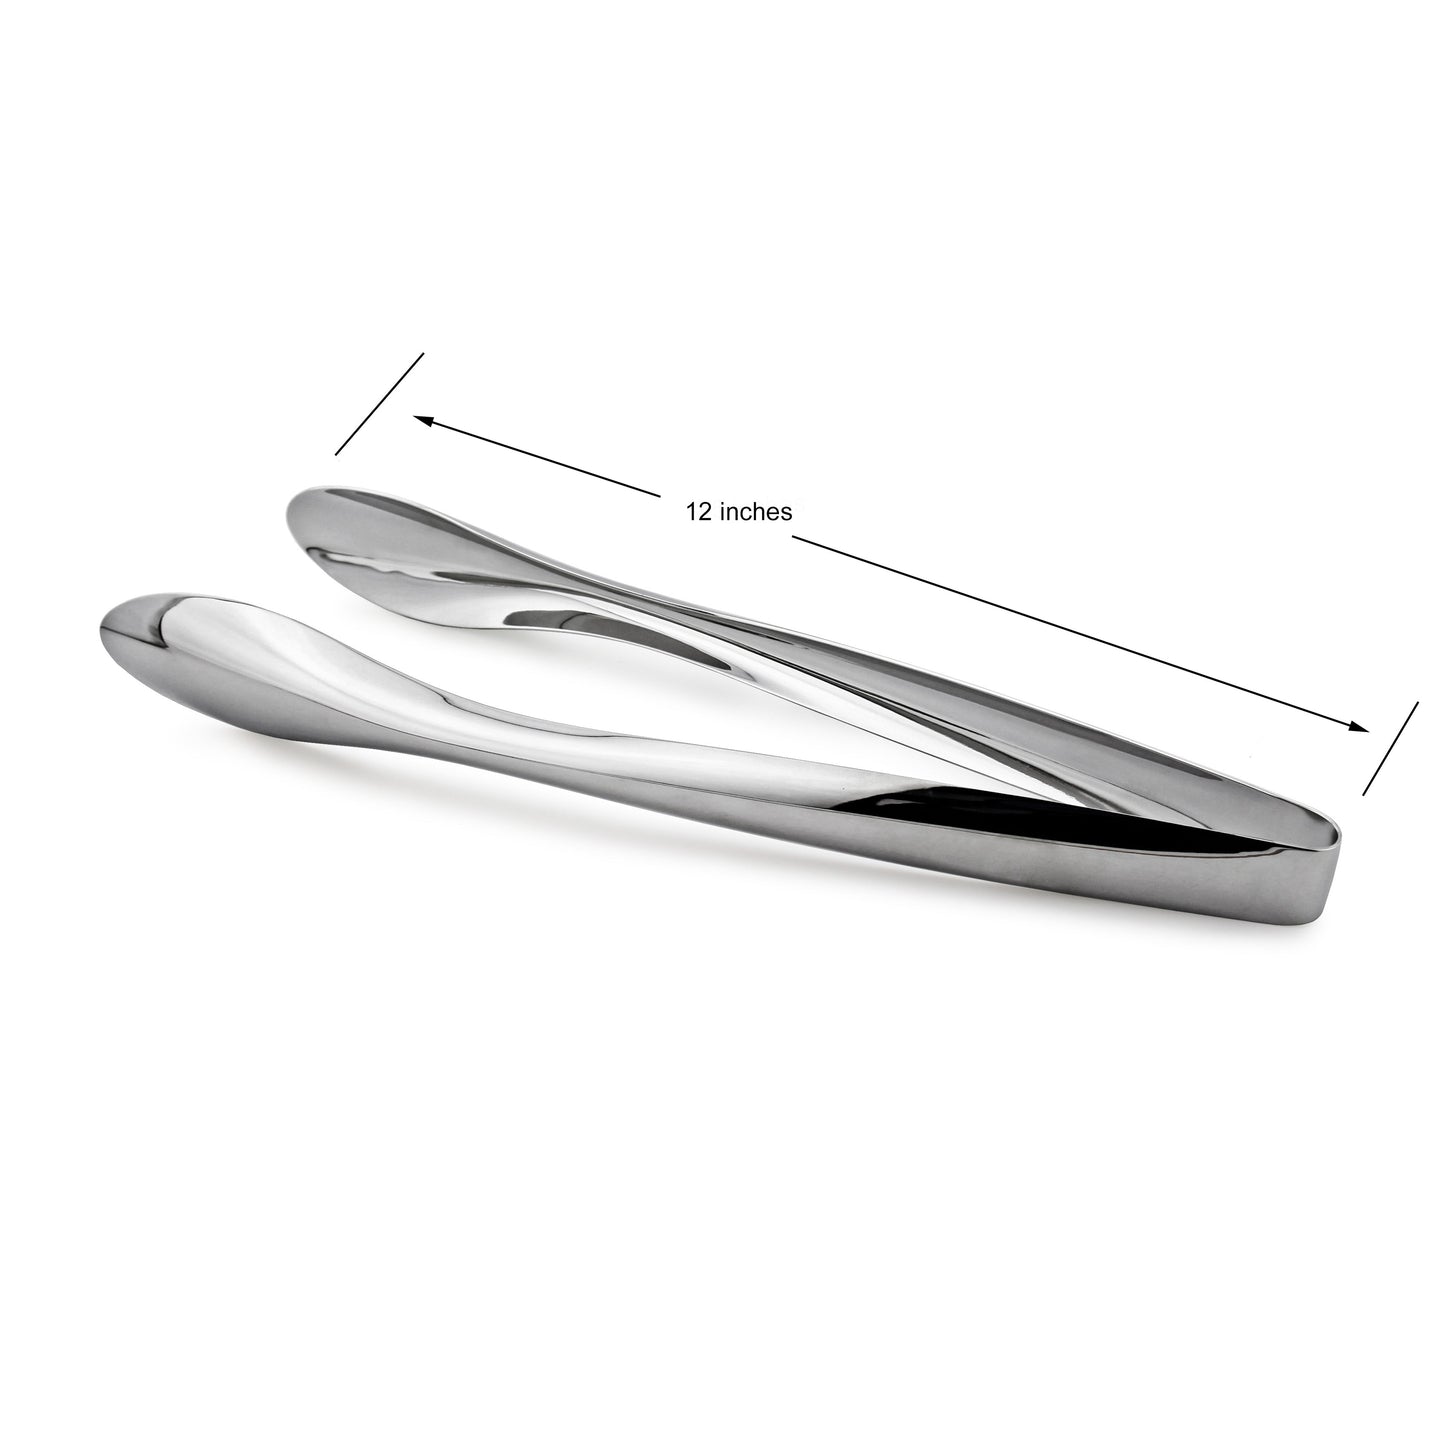 Cuisinox Serving Tong, available in 3 sizes